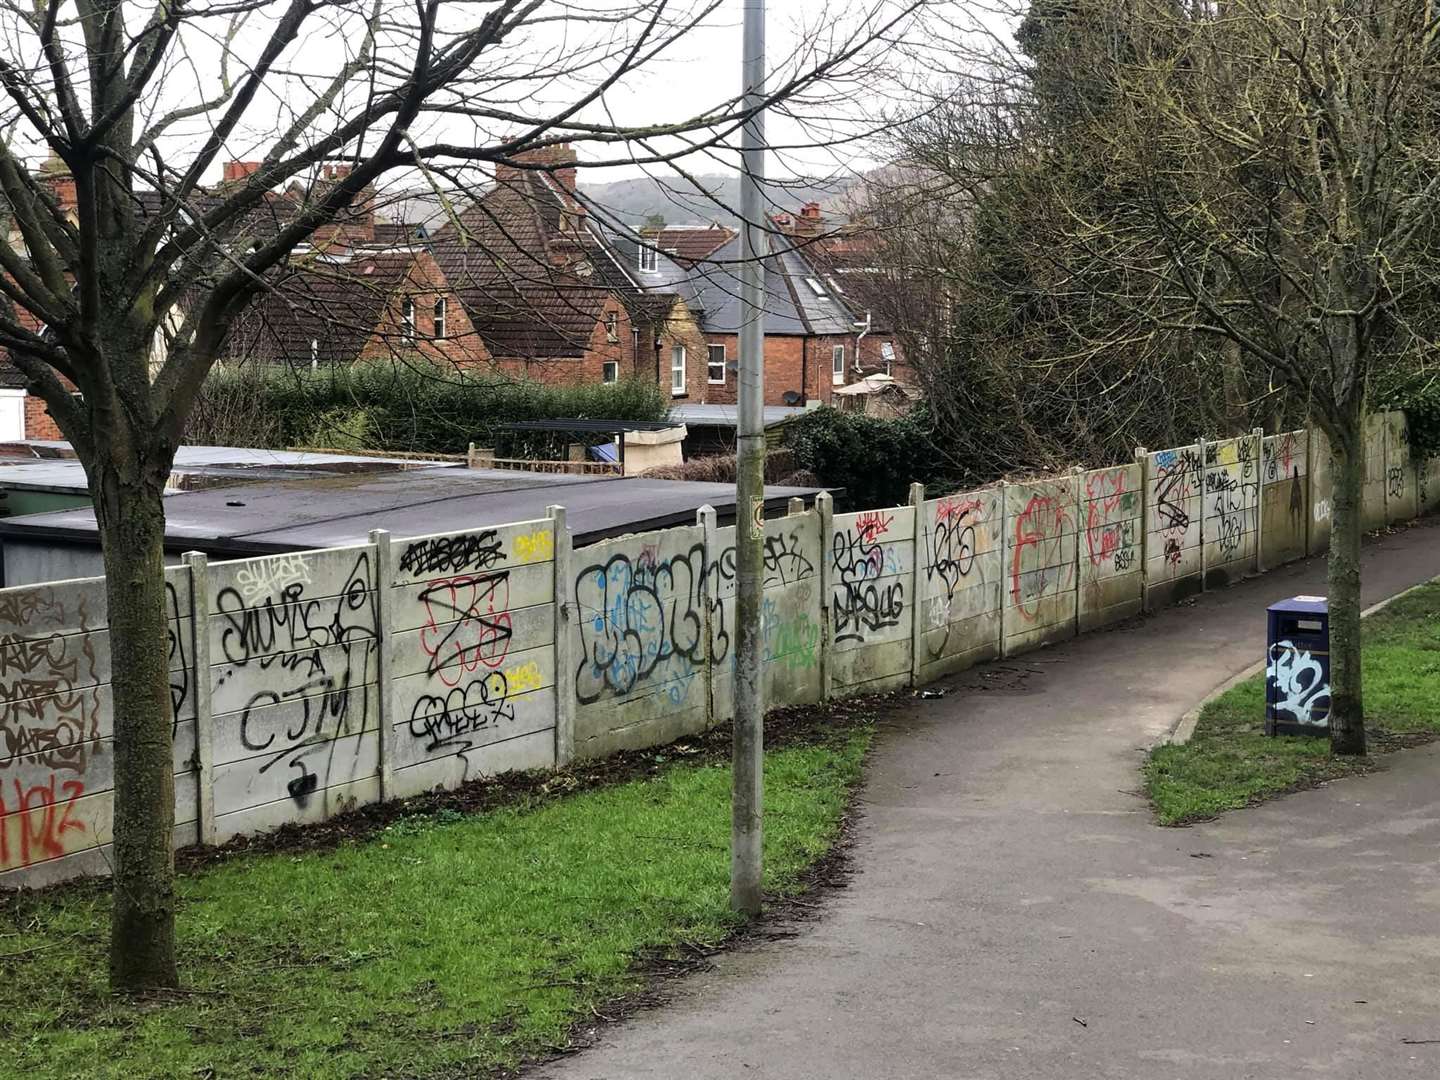 The graffiti has been spotted on public spaces, private property and even churches